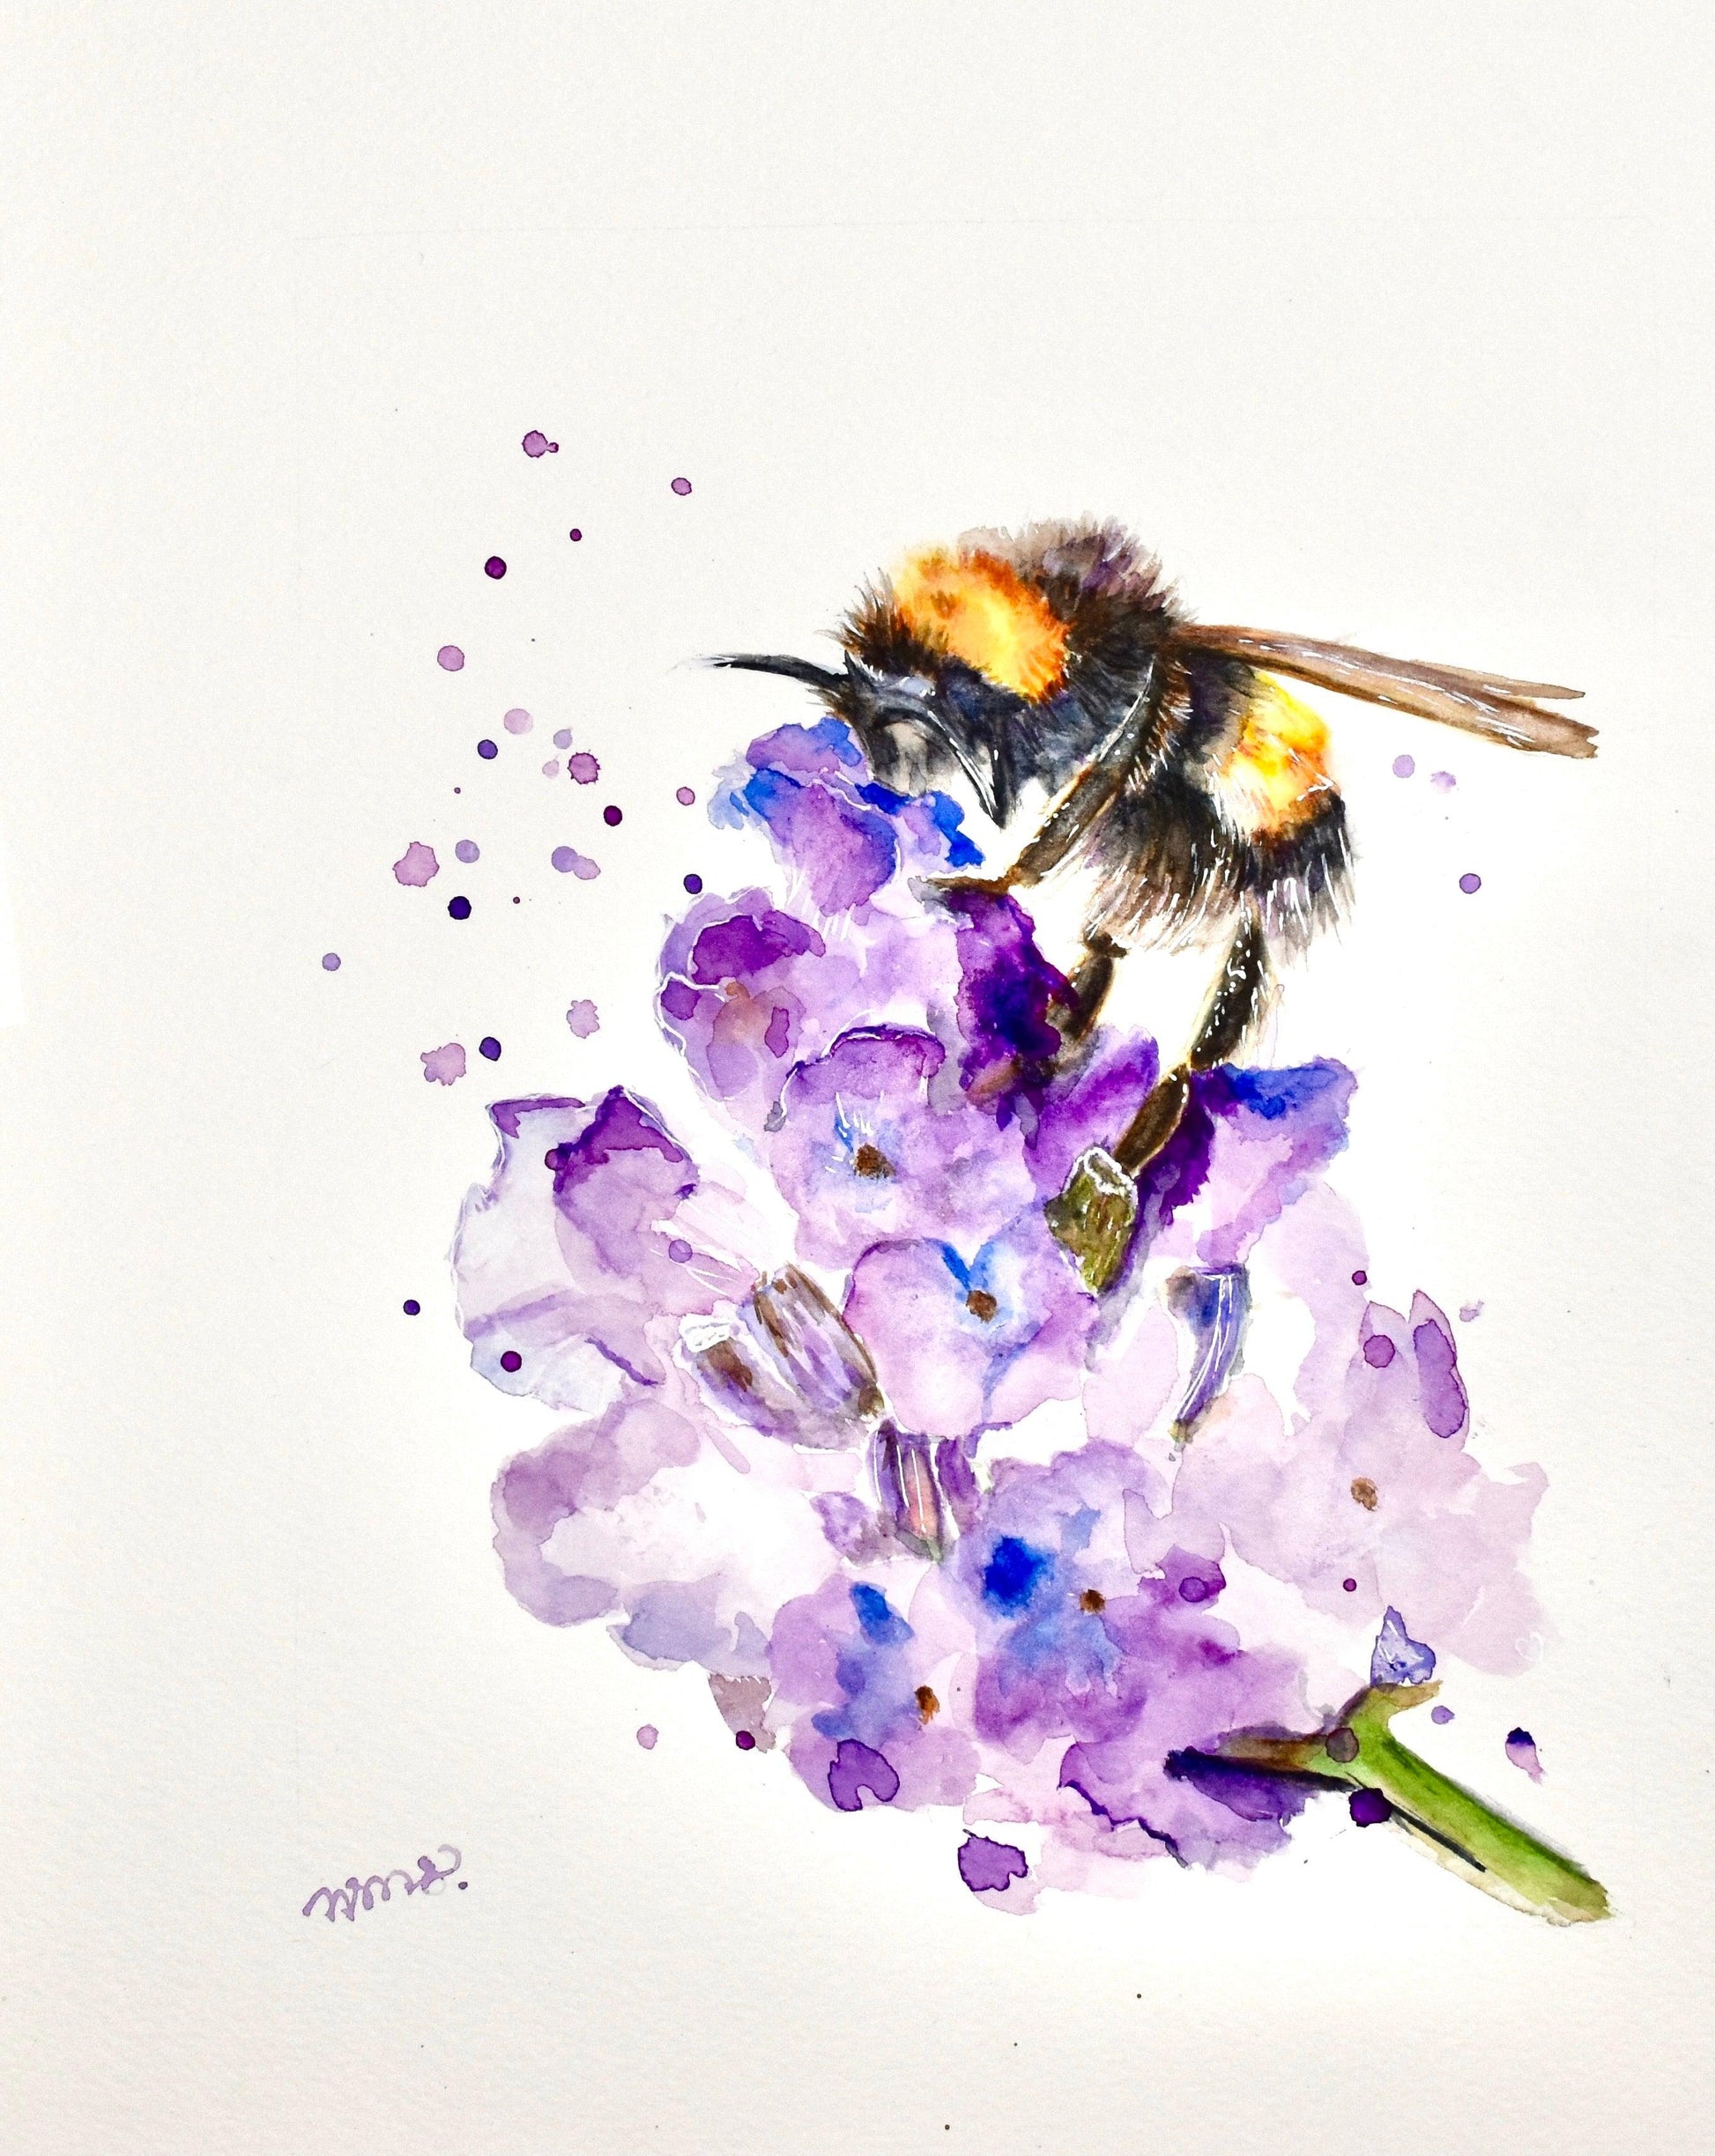 Bee and Lavender - Essence of the art by Yui & Bow